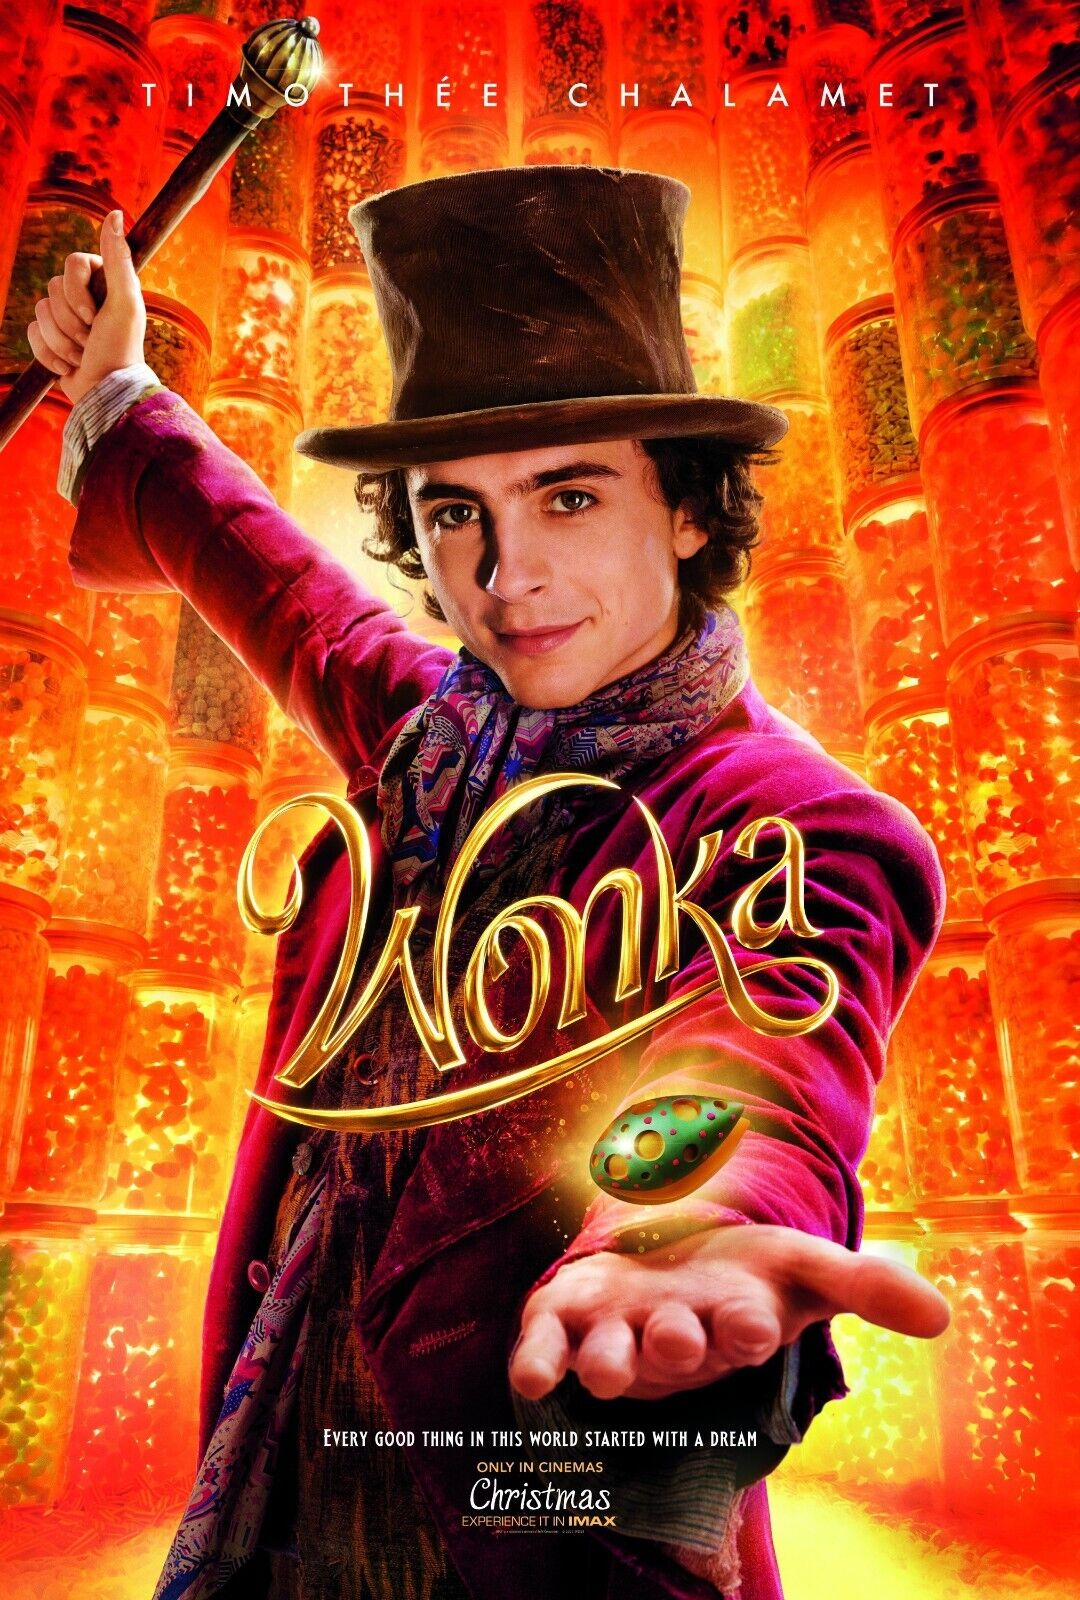 REVIEW: ‘Wonka’ is worth a watch